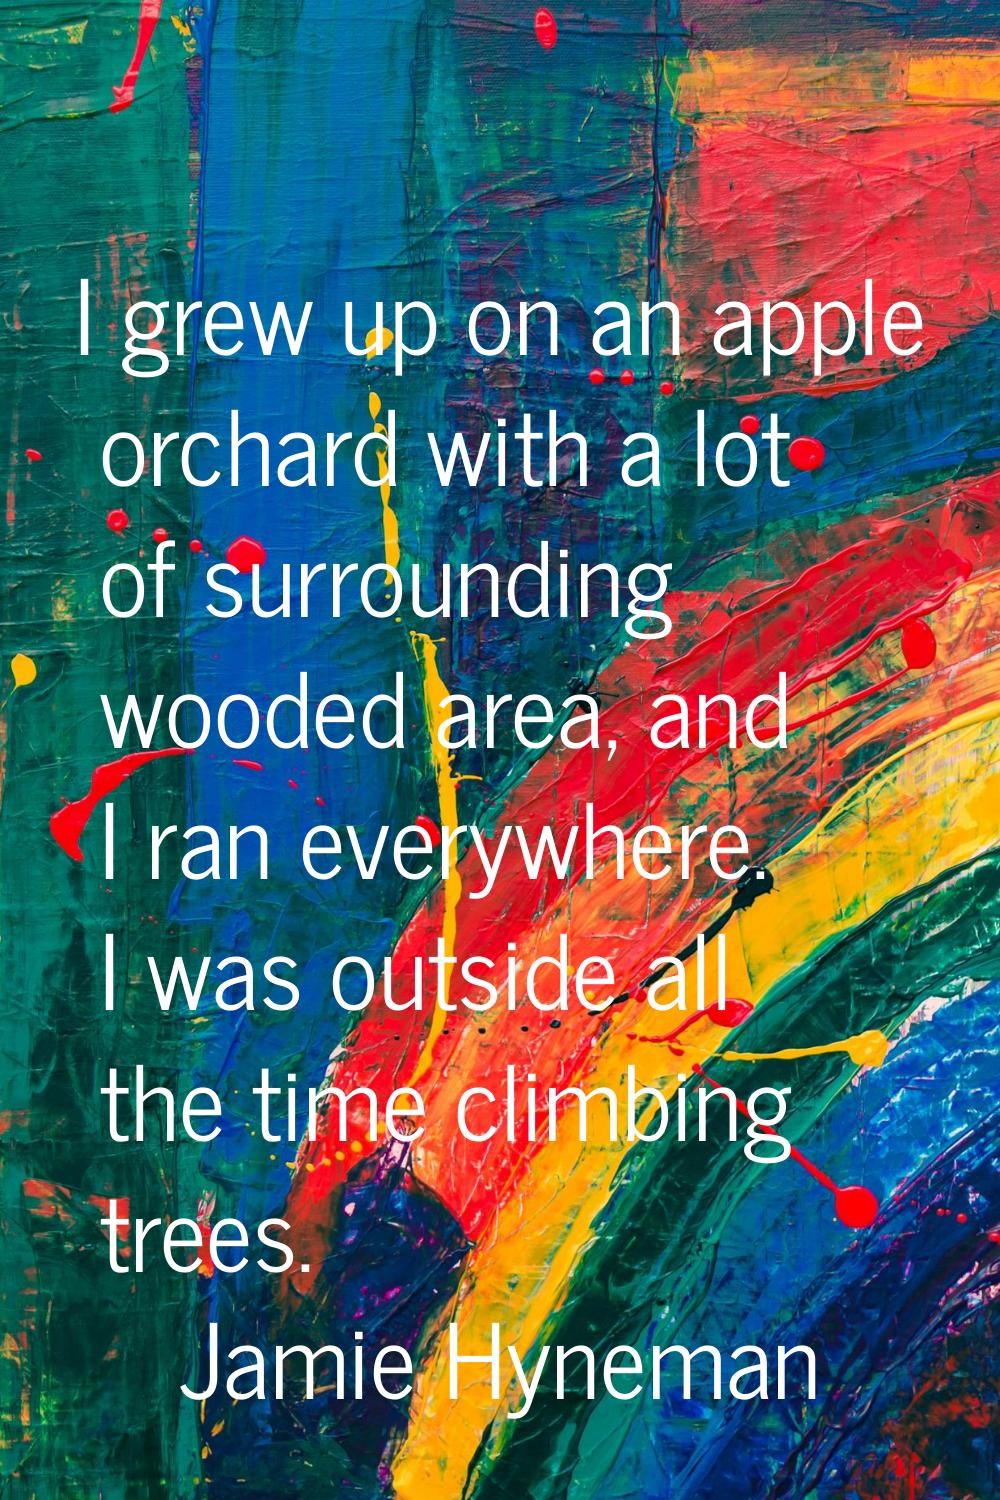 I grew up on an apple orchard with a lot of surrounding wooded area, and I ran everywhere. I was ou